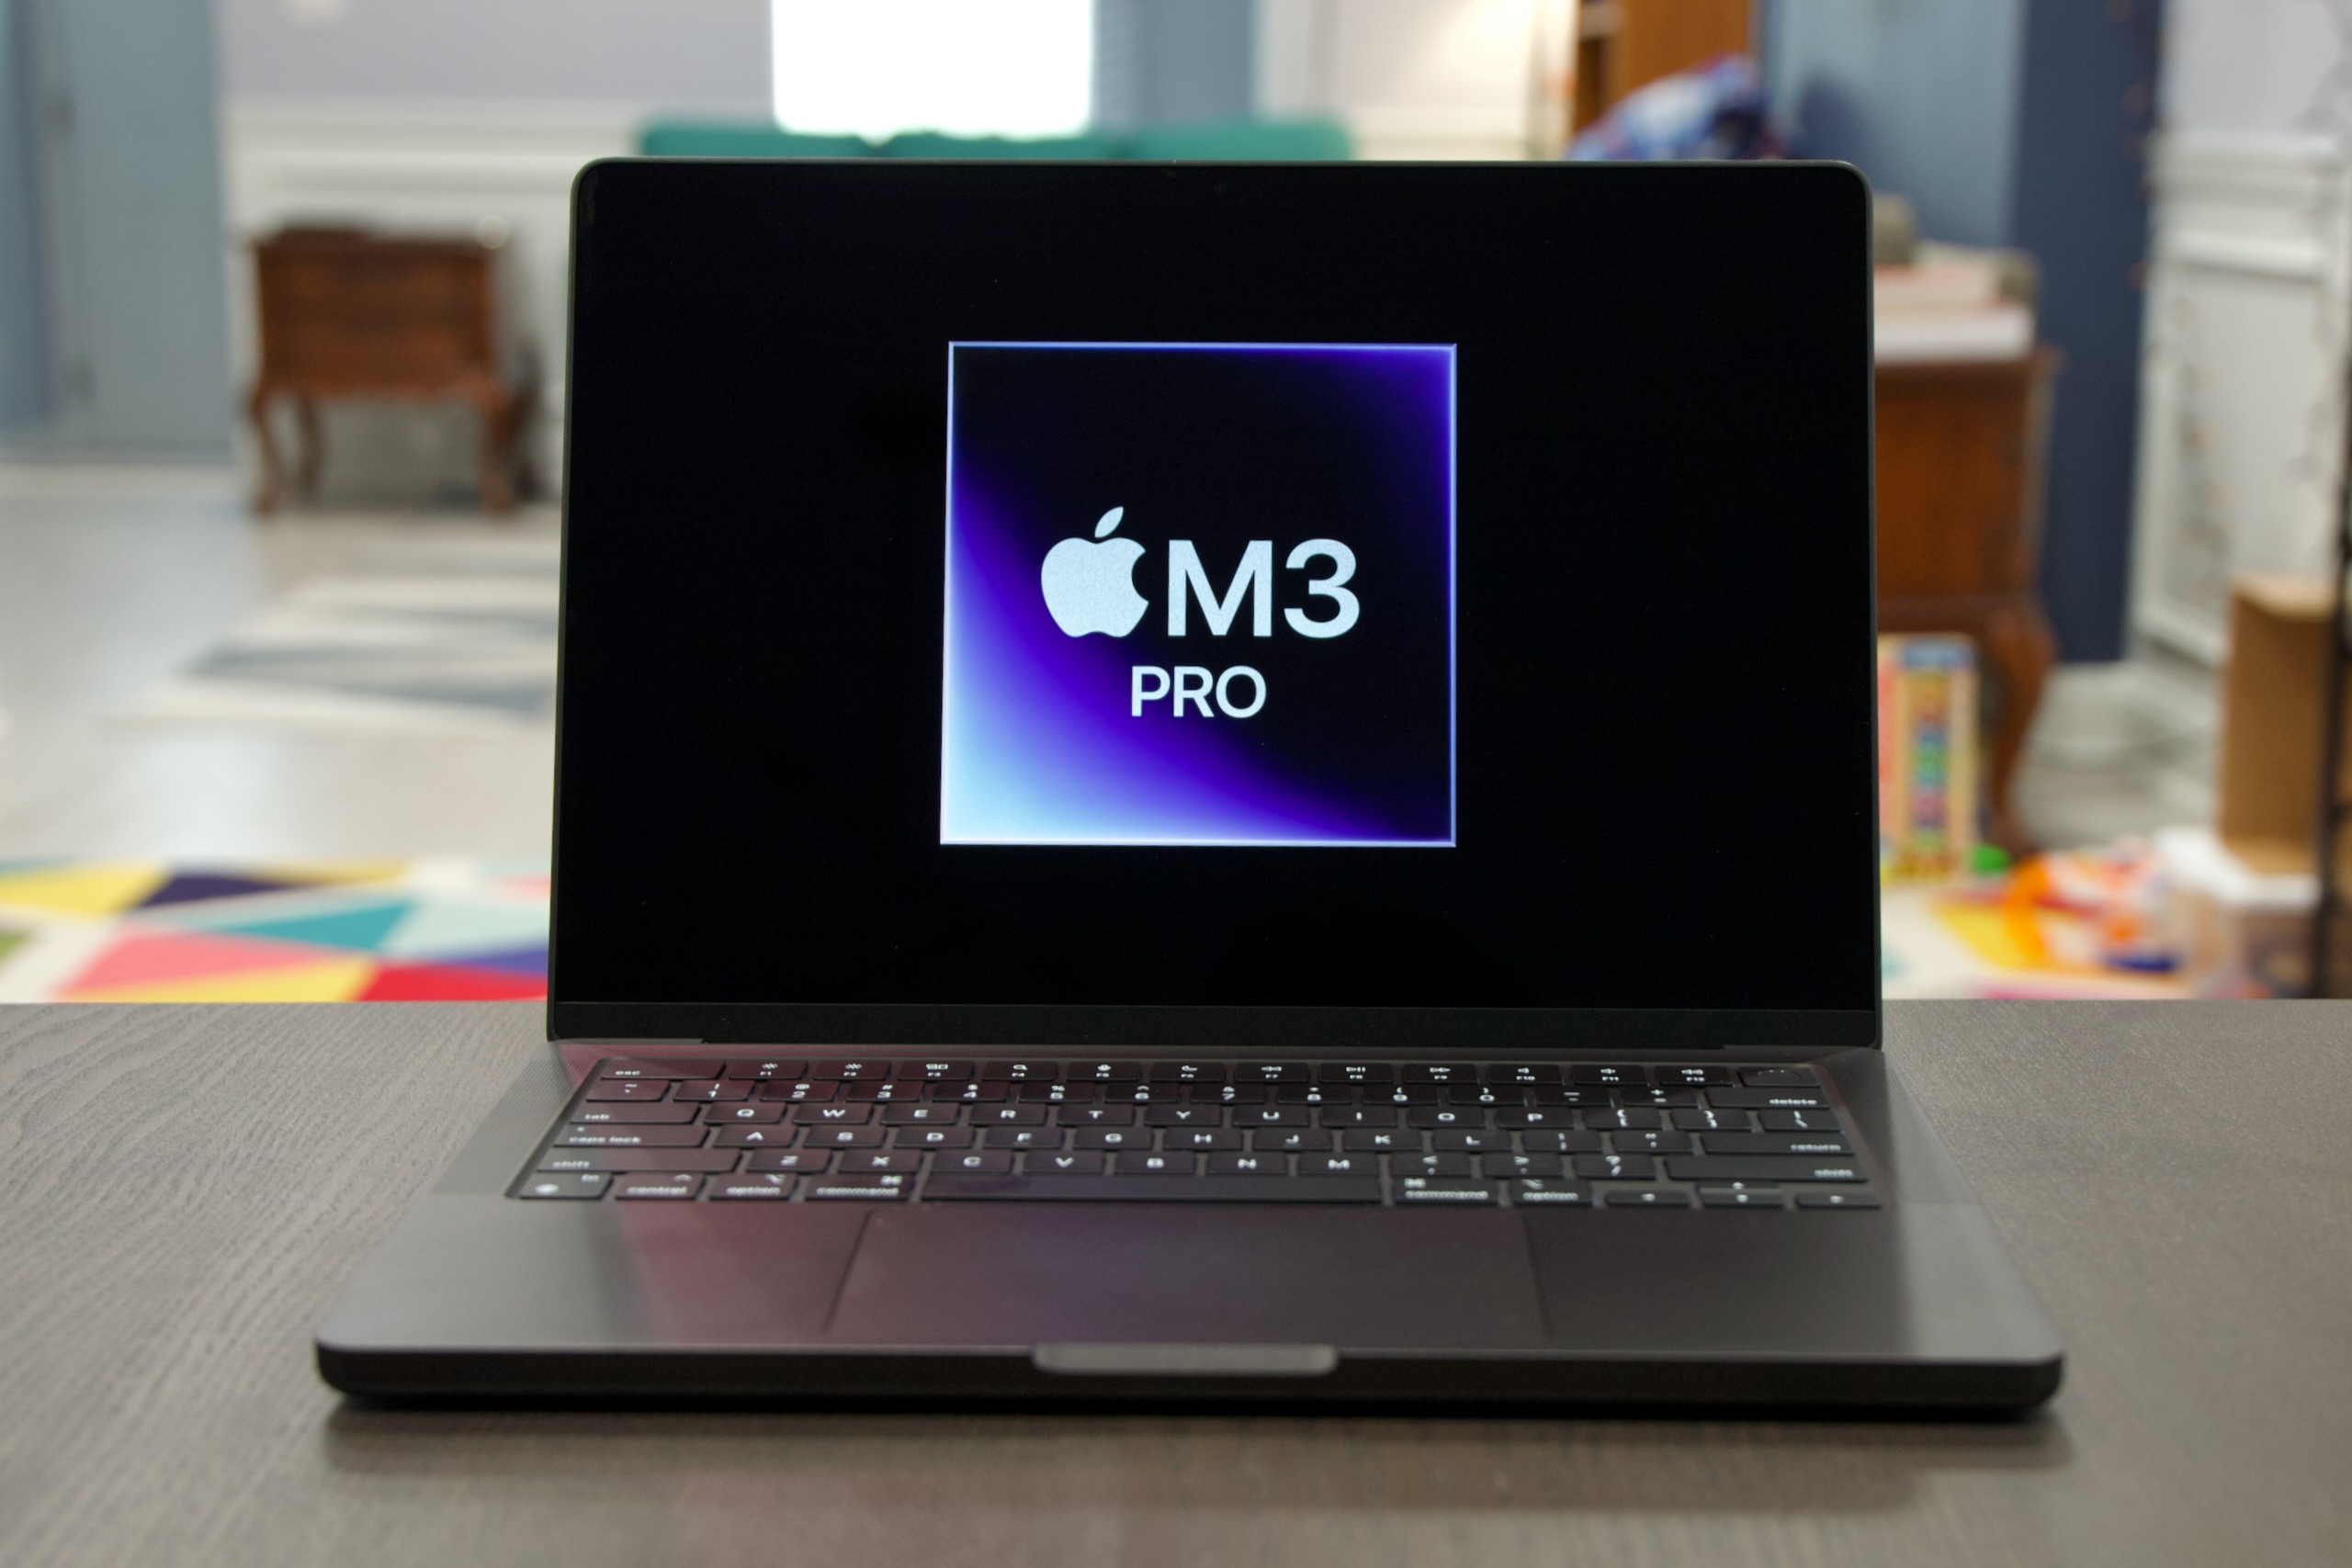 Testing Apple's M3 Pro: More efficient, but performance is a step sideways